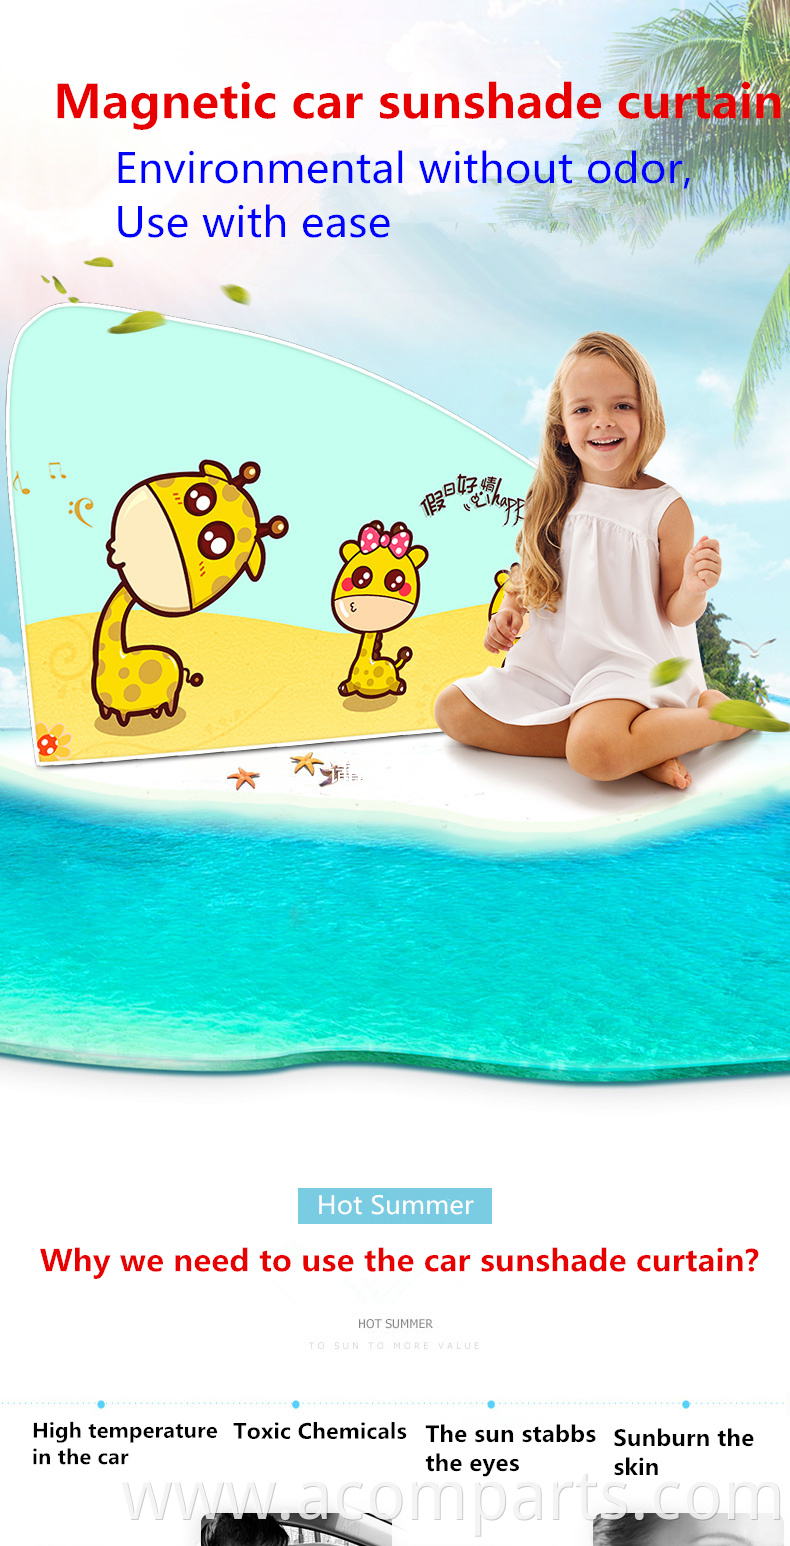 Sublimation printing water proof nylon foldable sunscreen stralis truck large size daily use sun visor